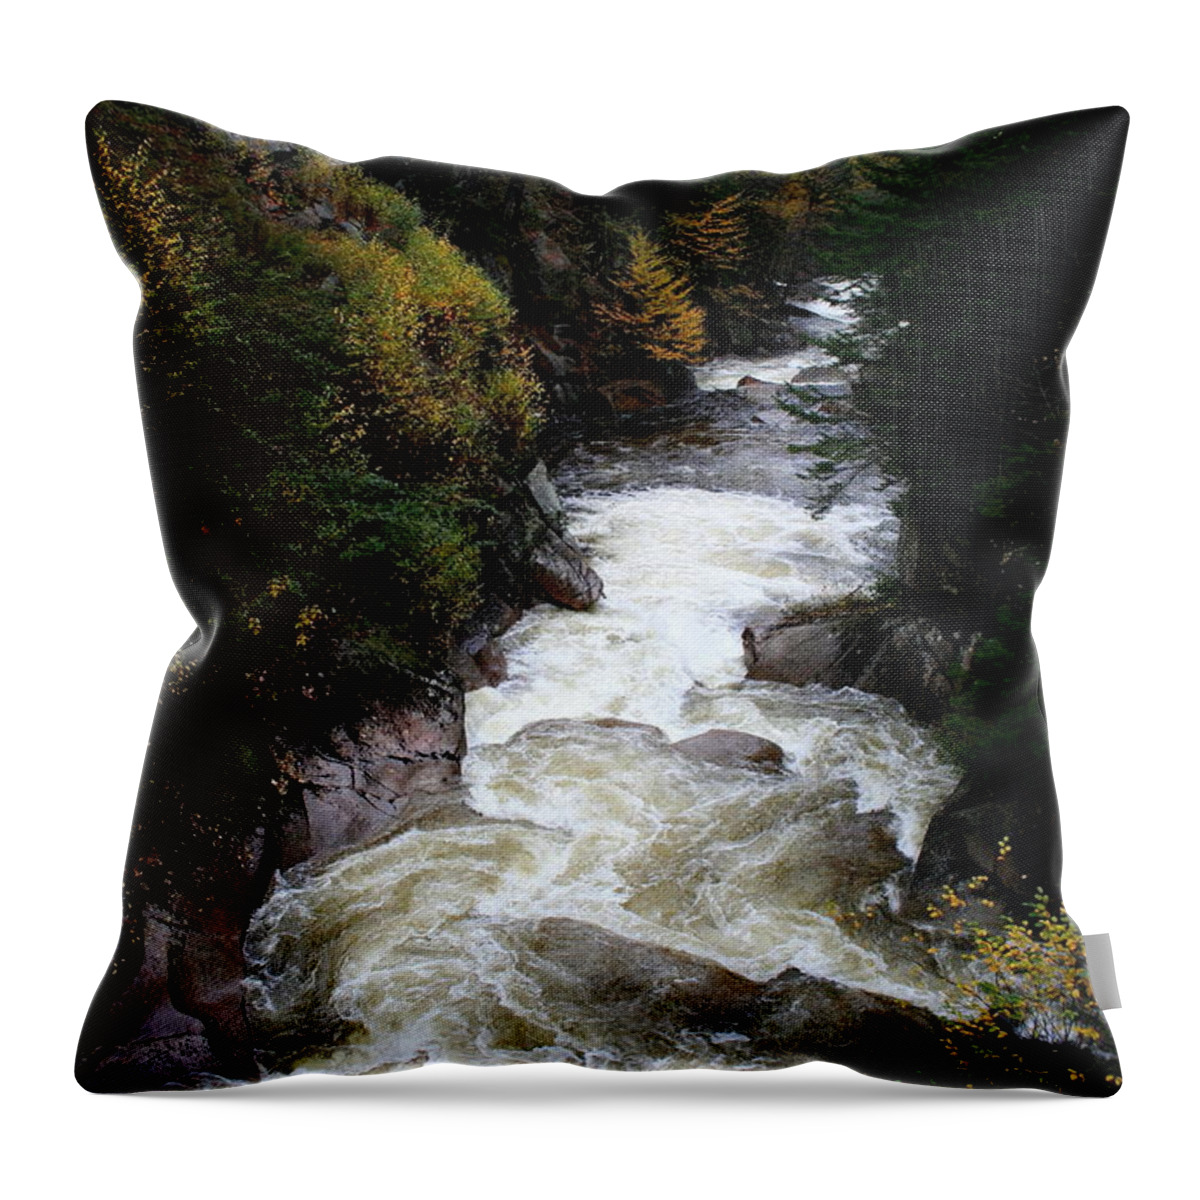 Franconia Notch Throw Pillow featuring the photograph Pemigewasset River White Mountains by Christiane Schulze Art And Photography